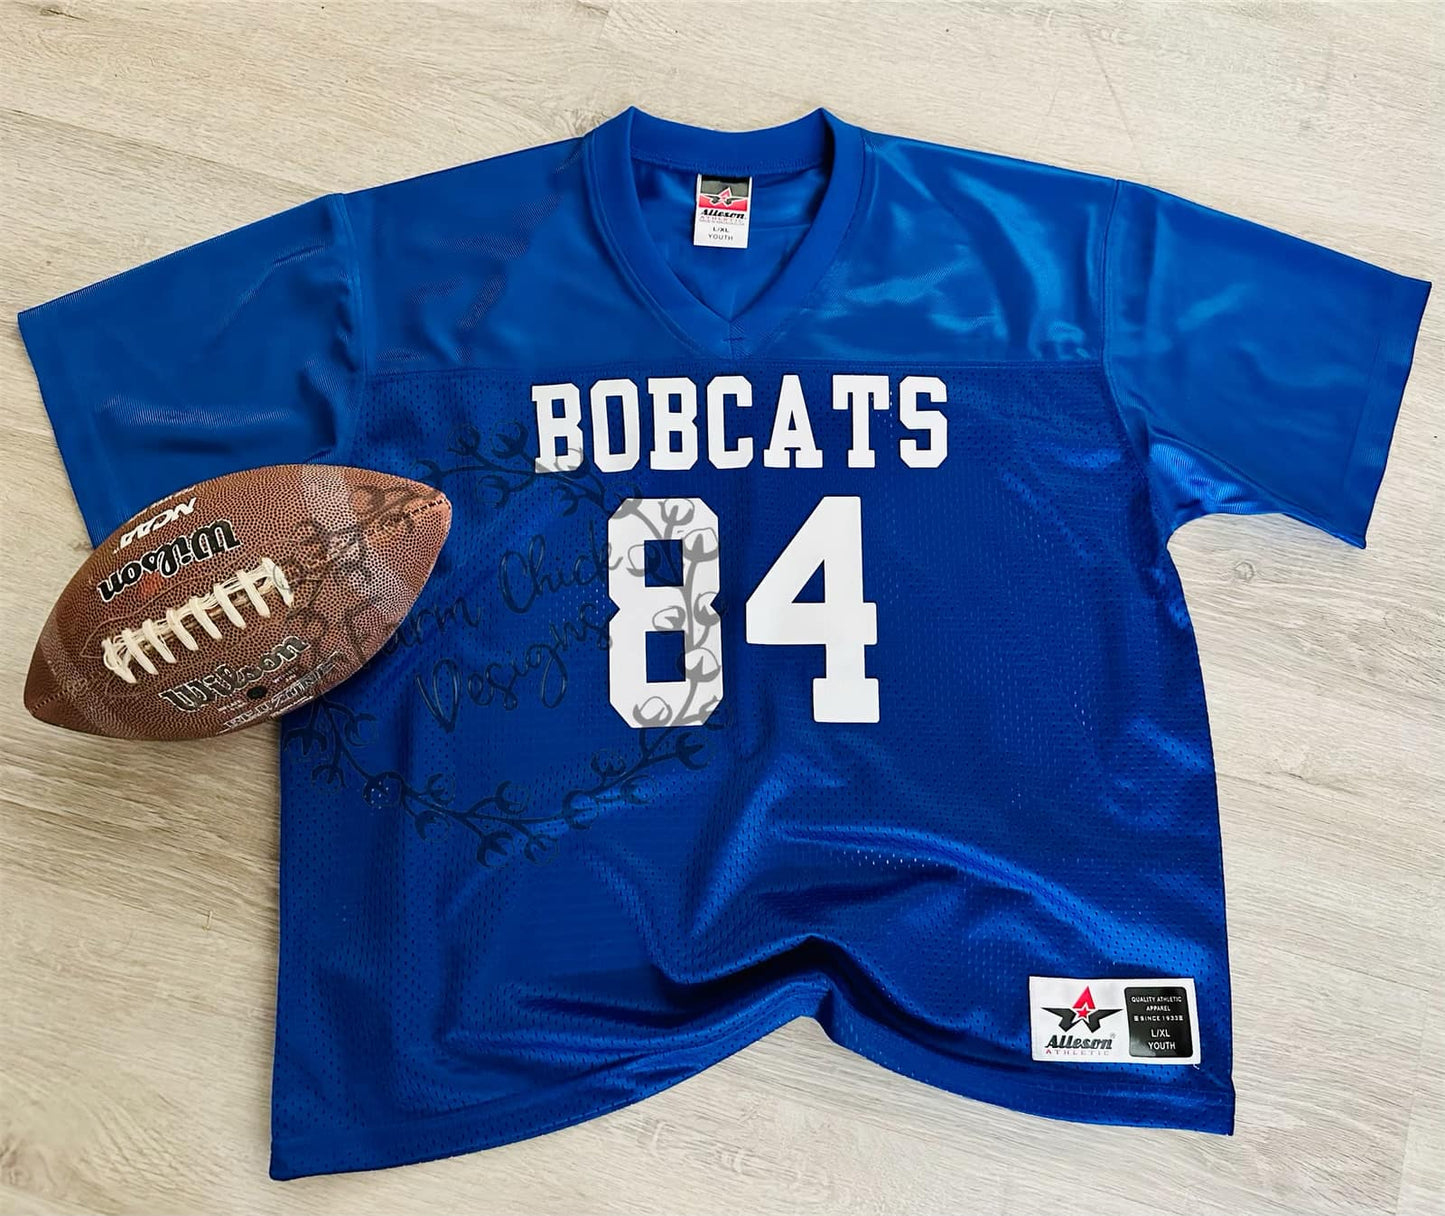 Custom Youth and Toddler Football Jersey